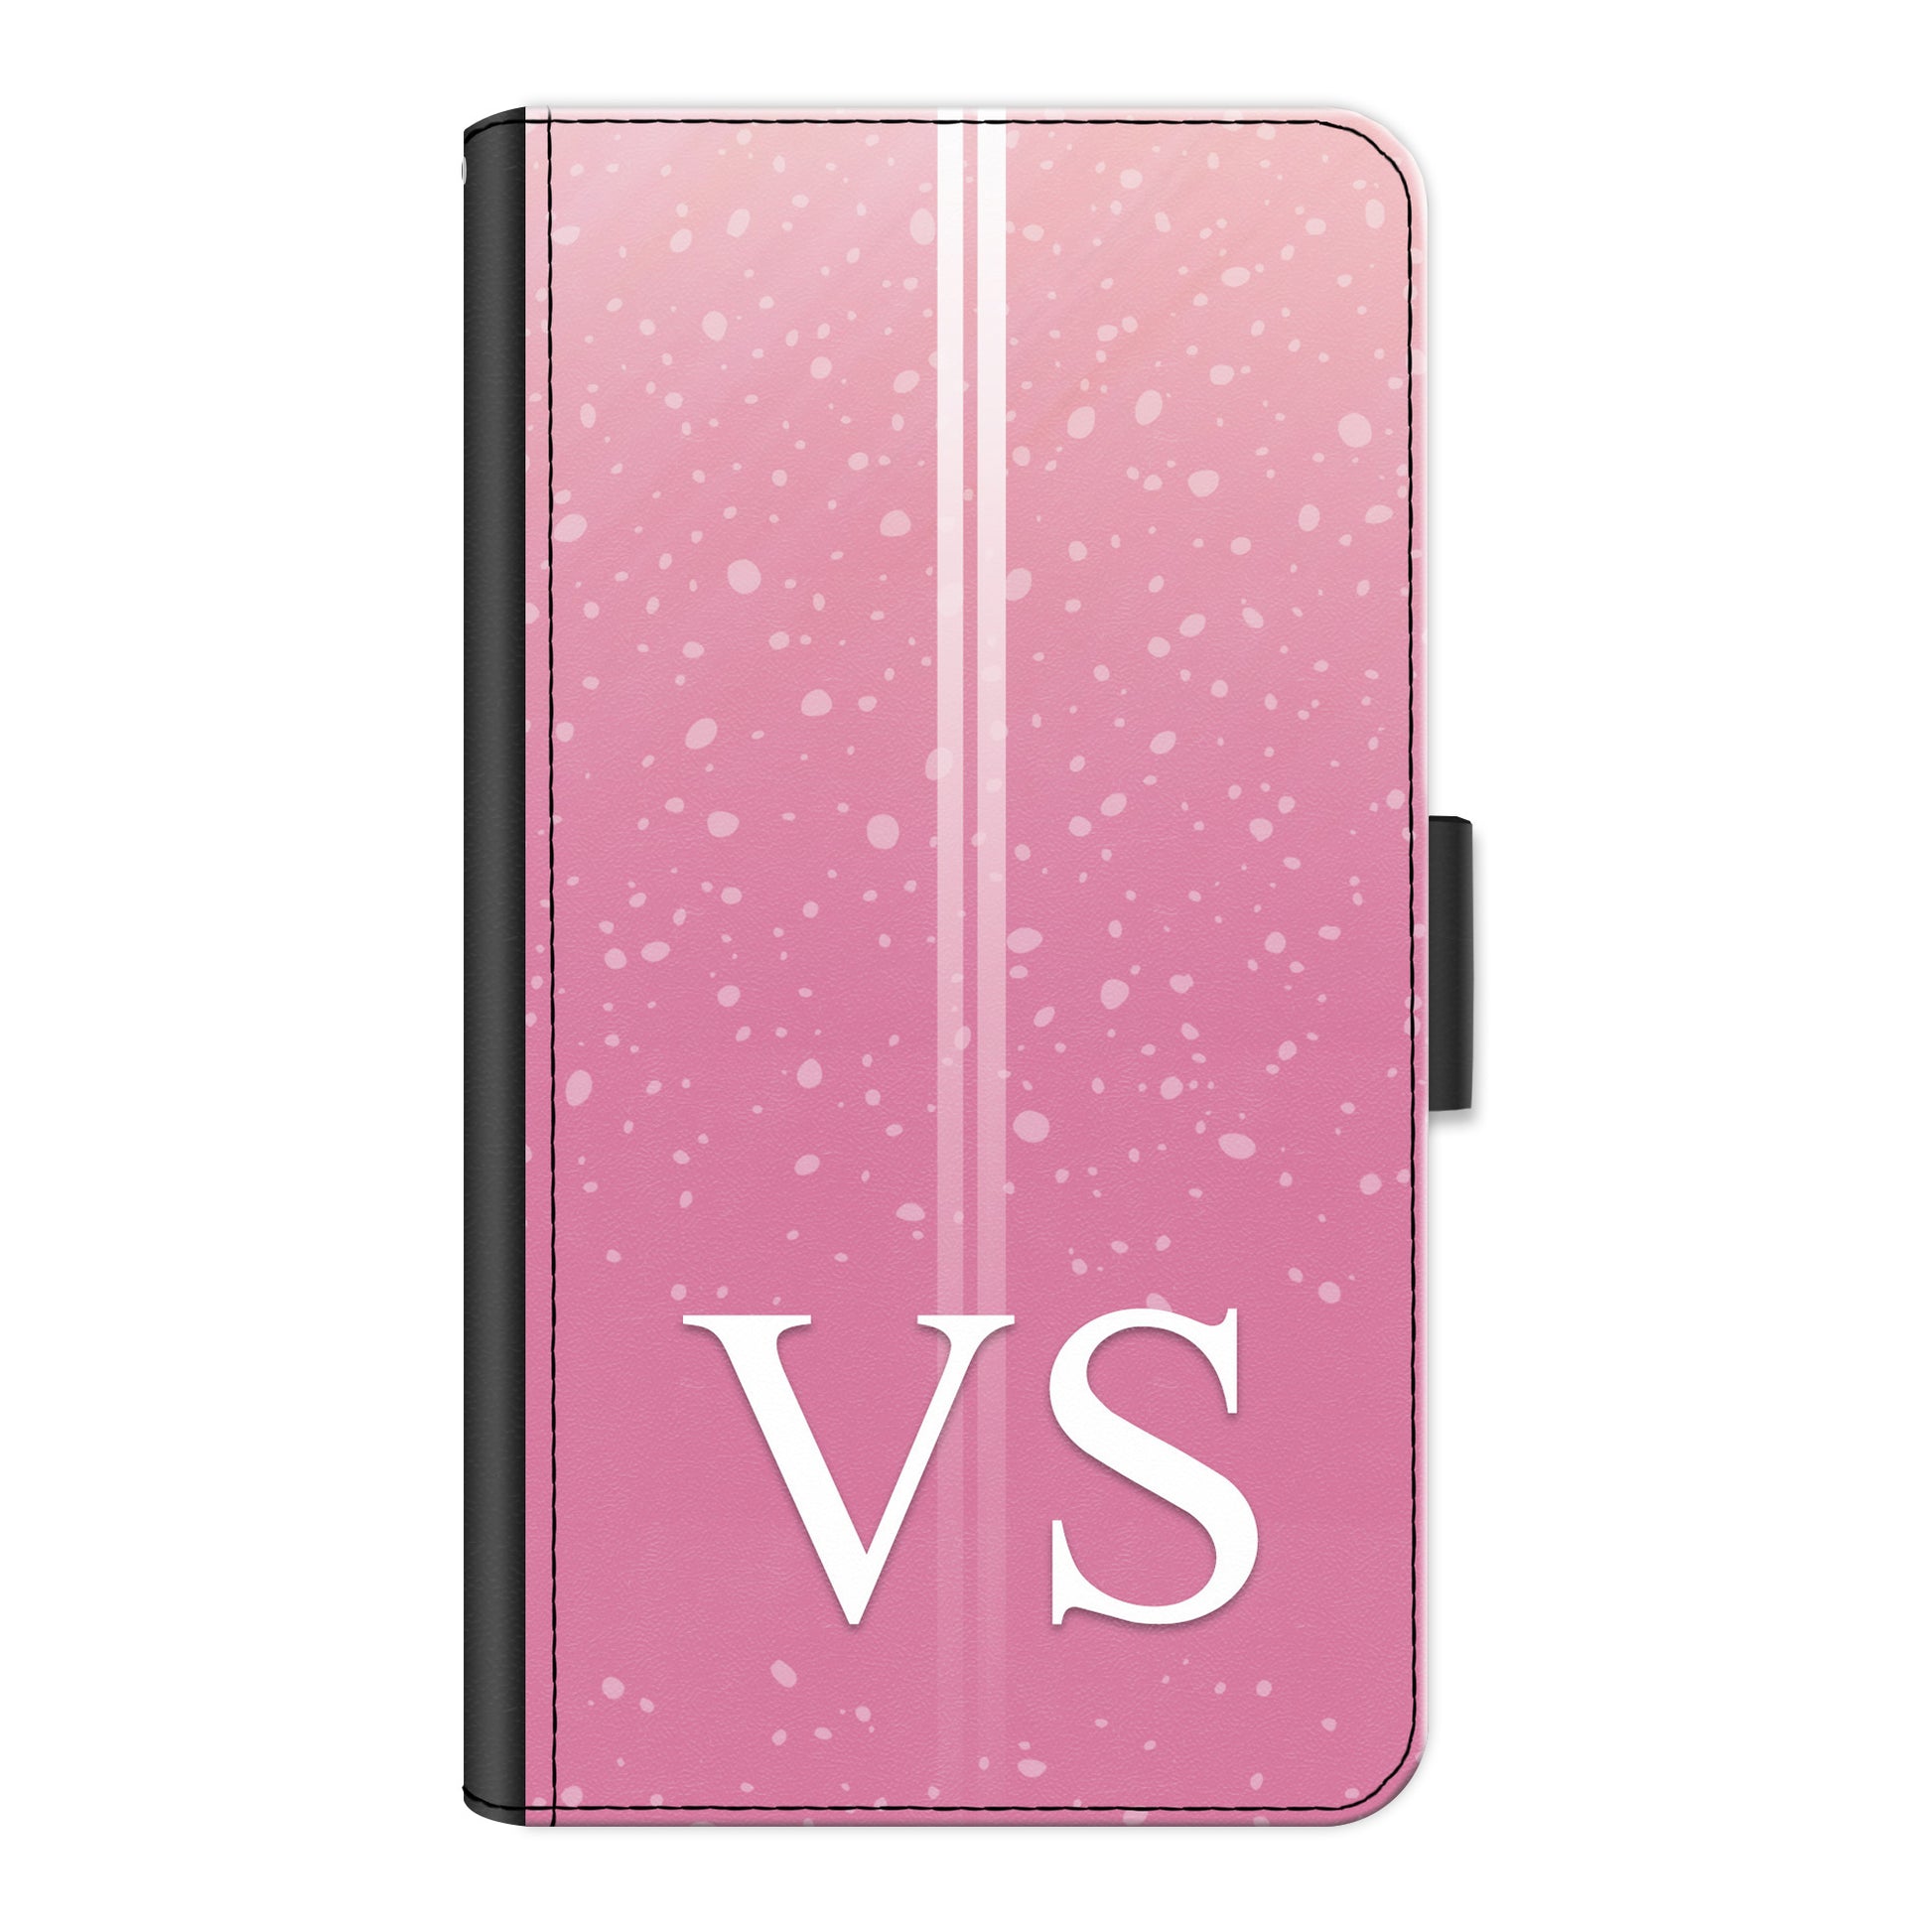 Personalised HTC Phone Leather Wallet with White Initials, Pin Stripes and Droplets on Pink